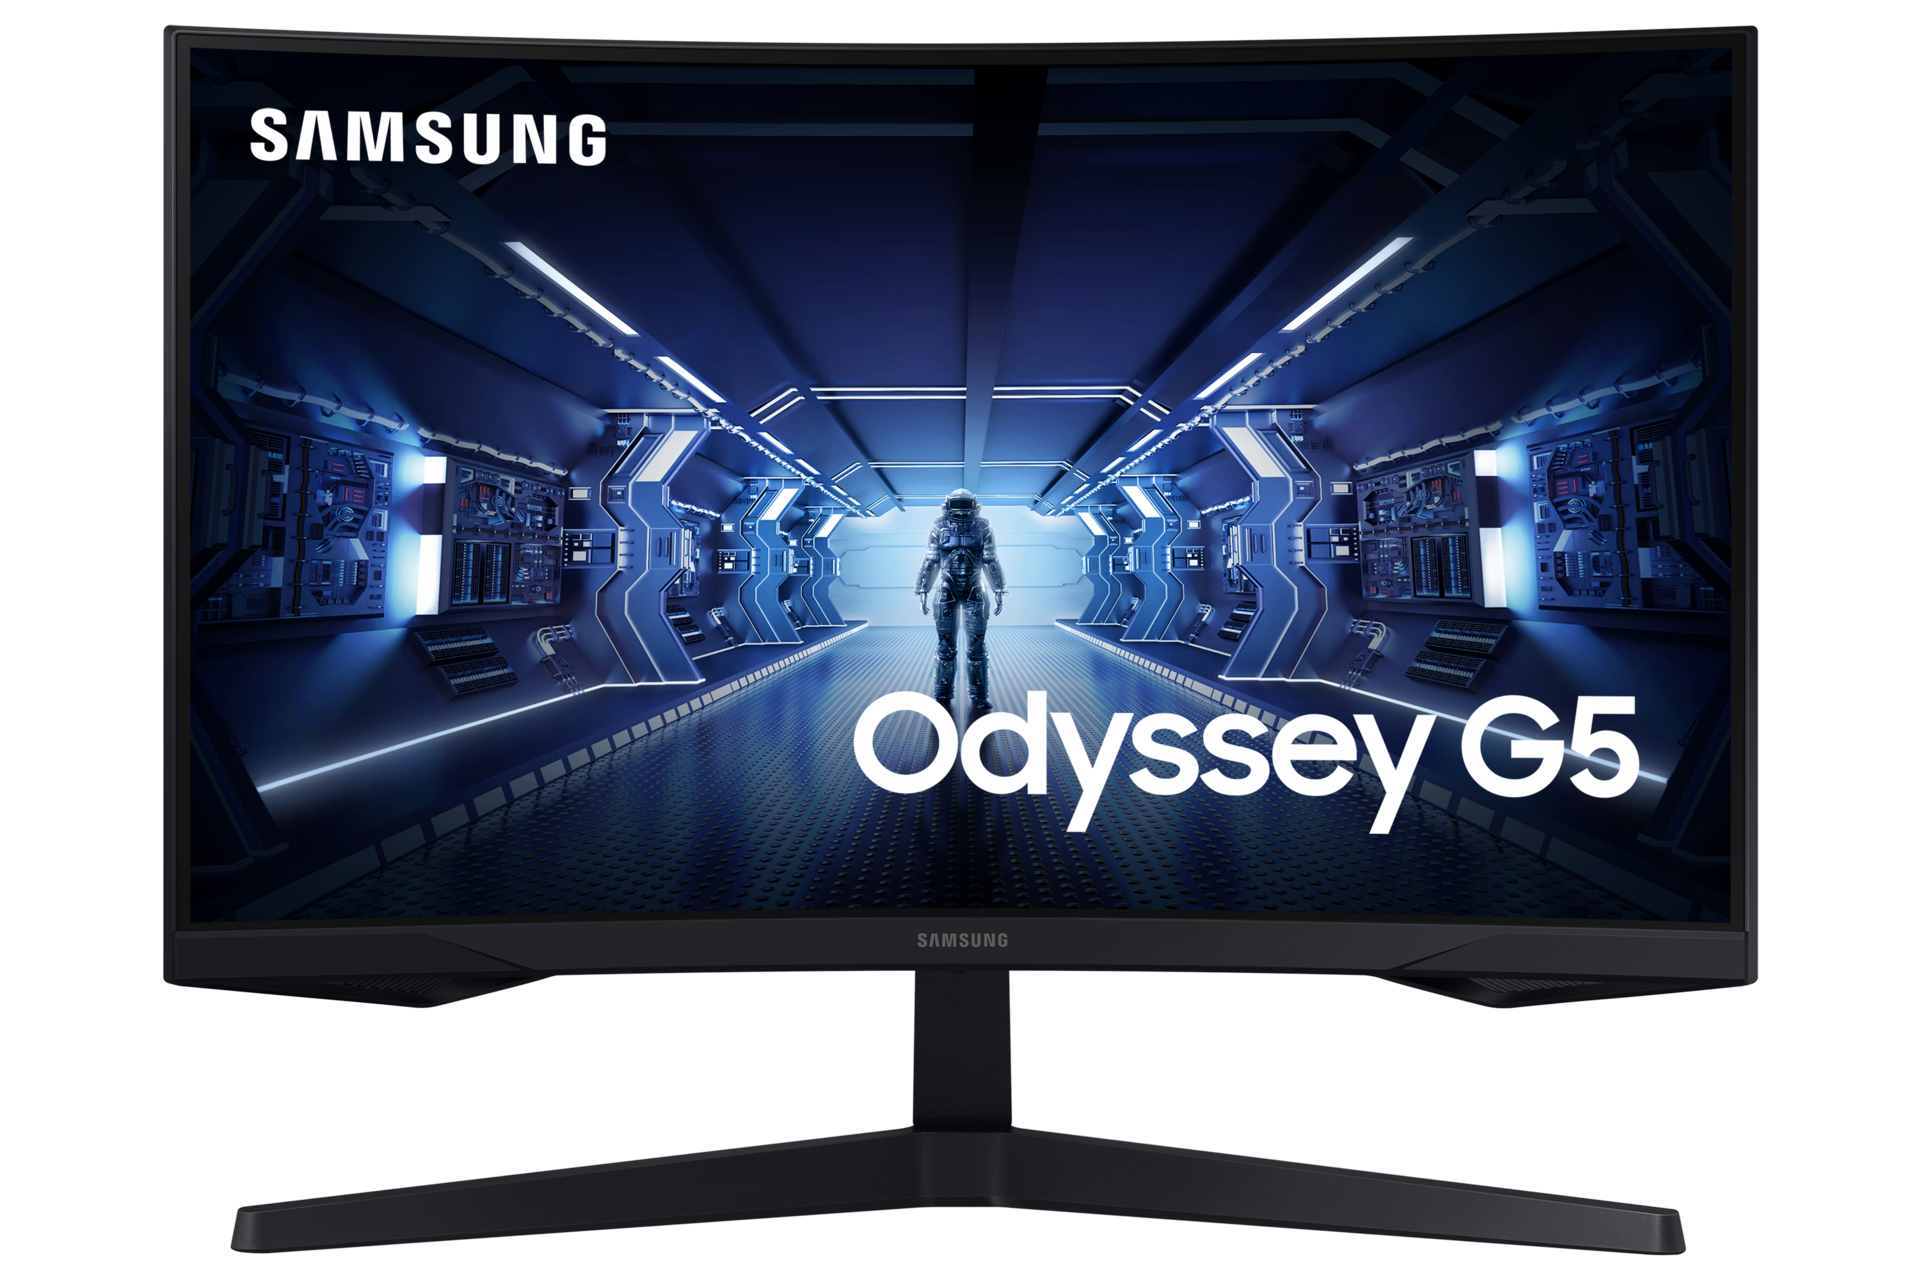 27 Odyssey G5 WQHD Gaming Monitor with 1000R curved screen